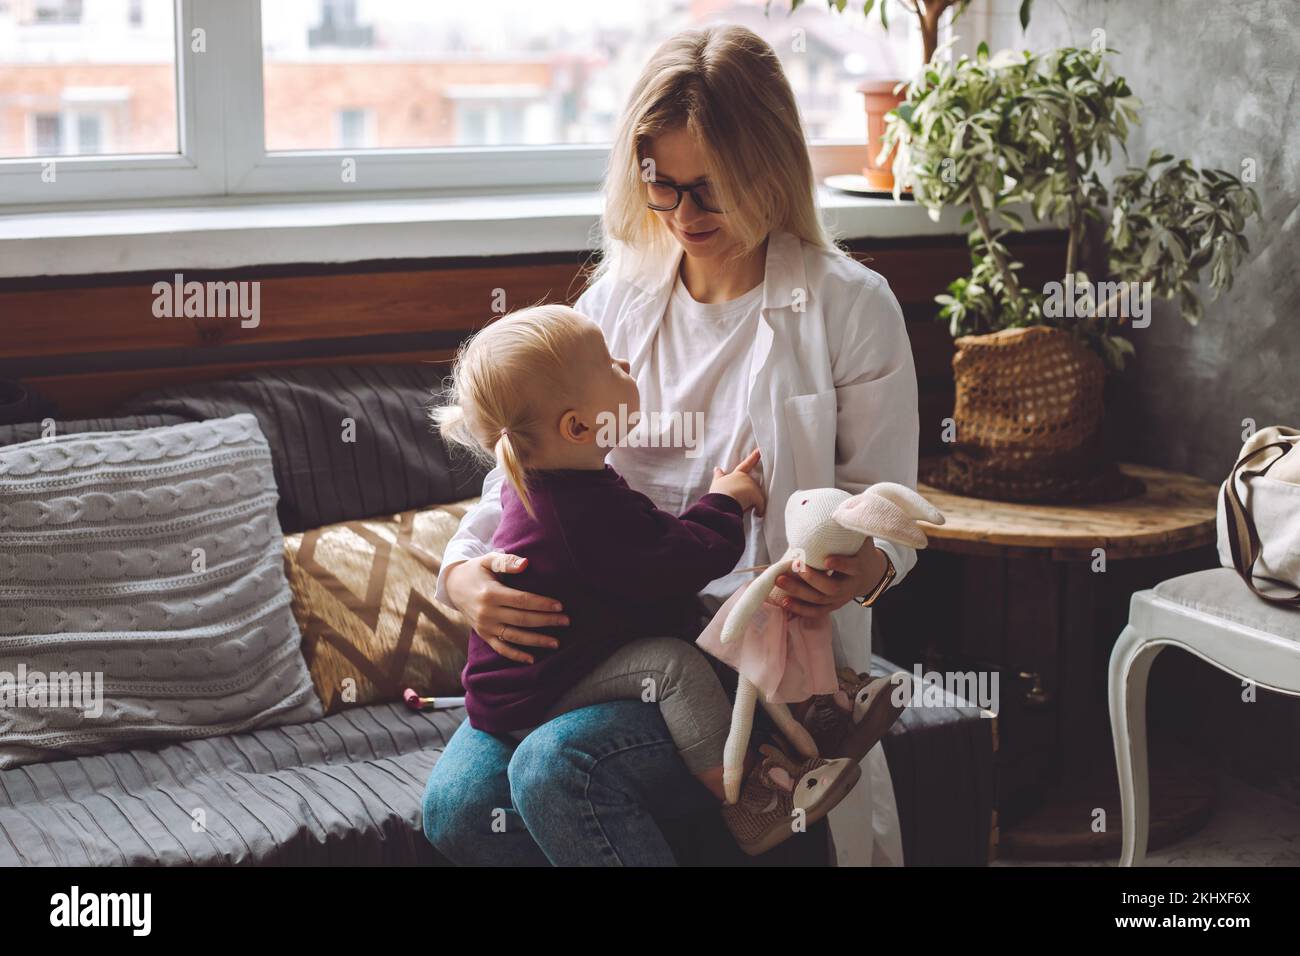 Side view of little blond girl sit on childrens doctor, looking at pediatrician visiting patient at home. Nurse visit. Stock Photo